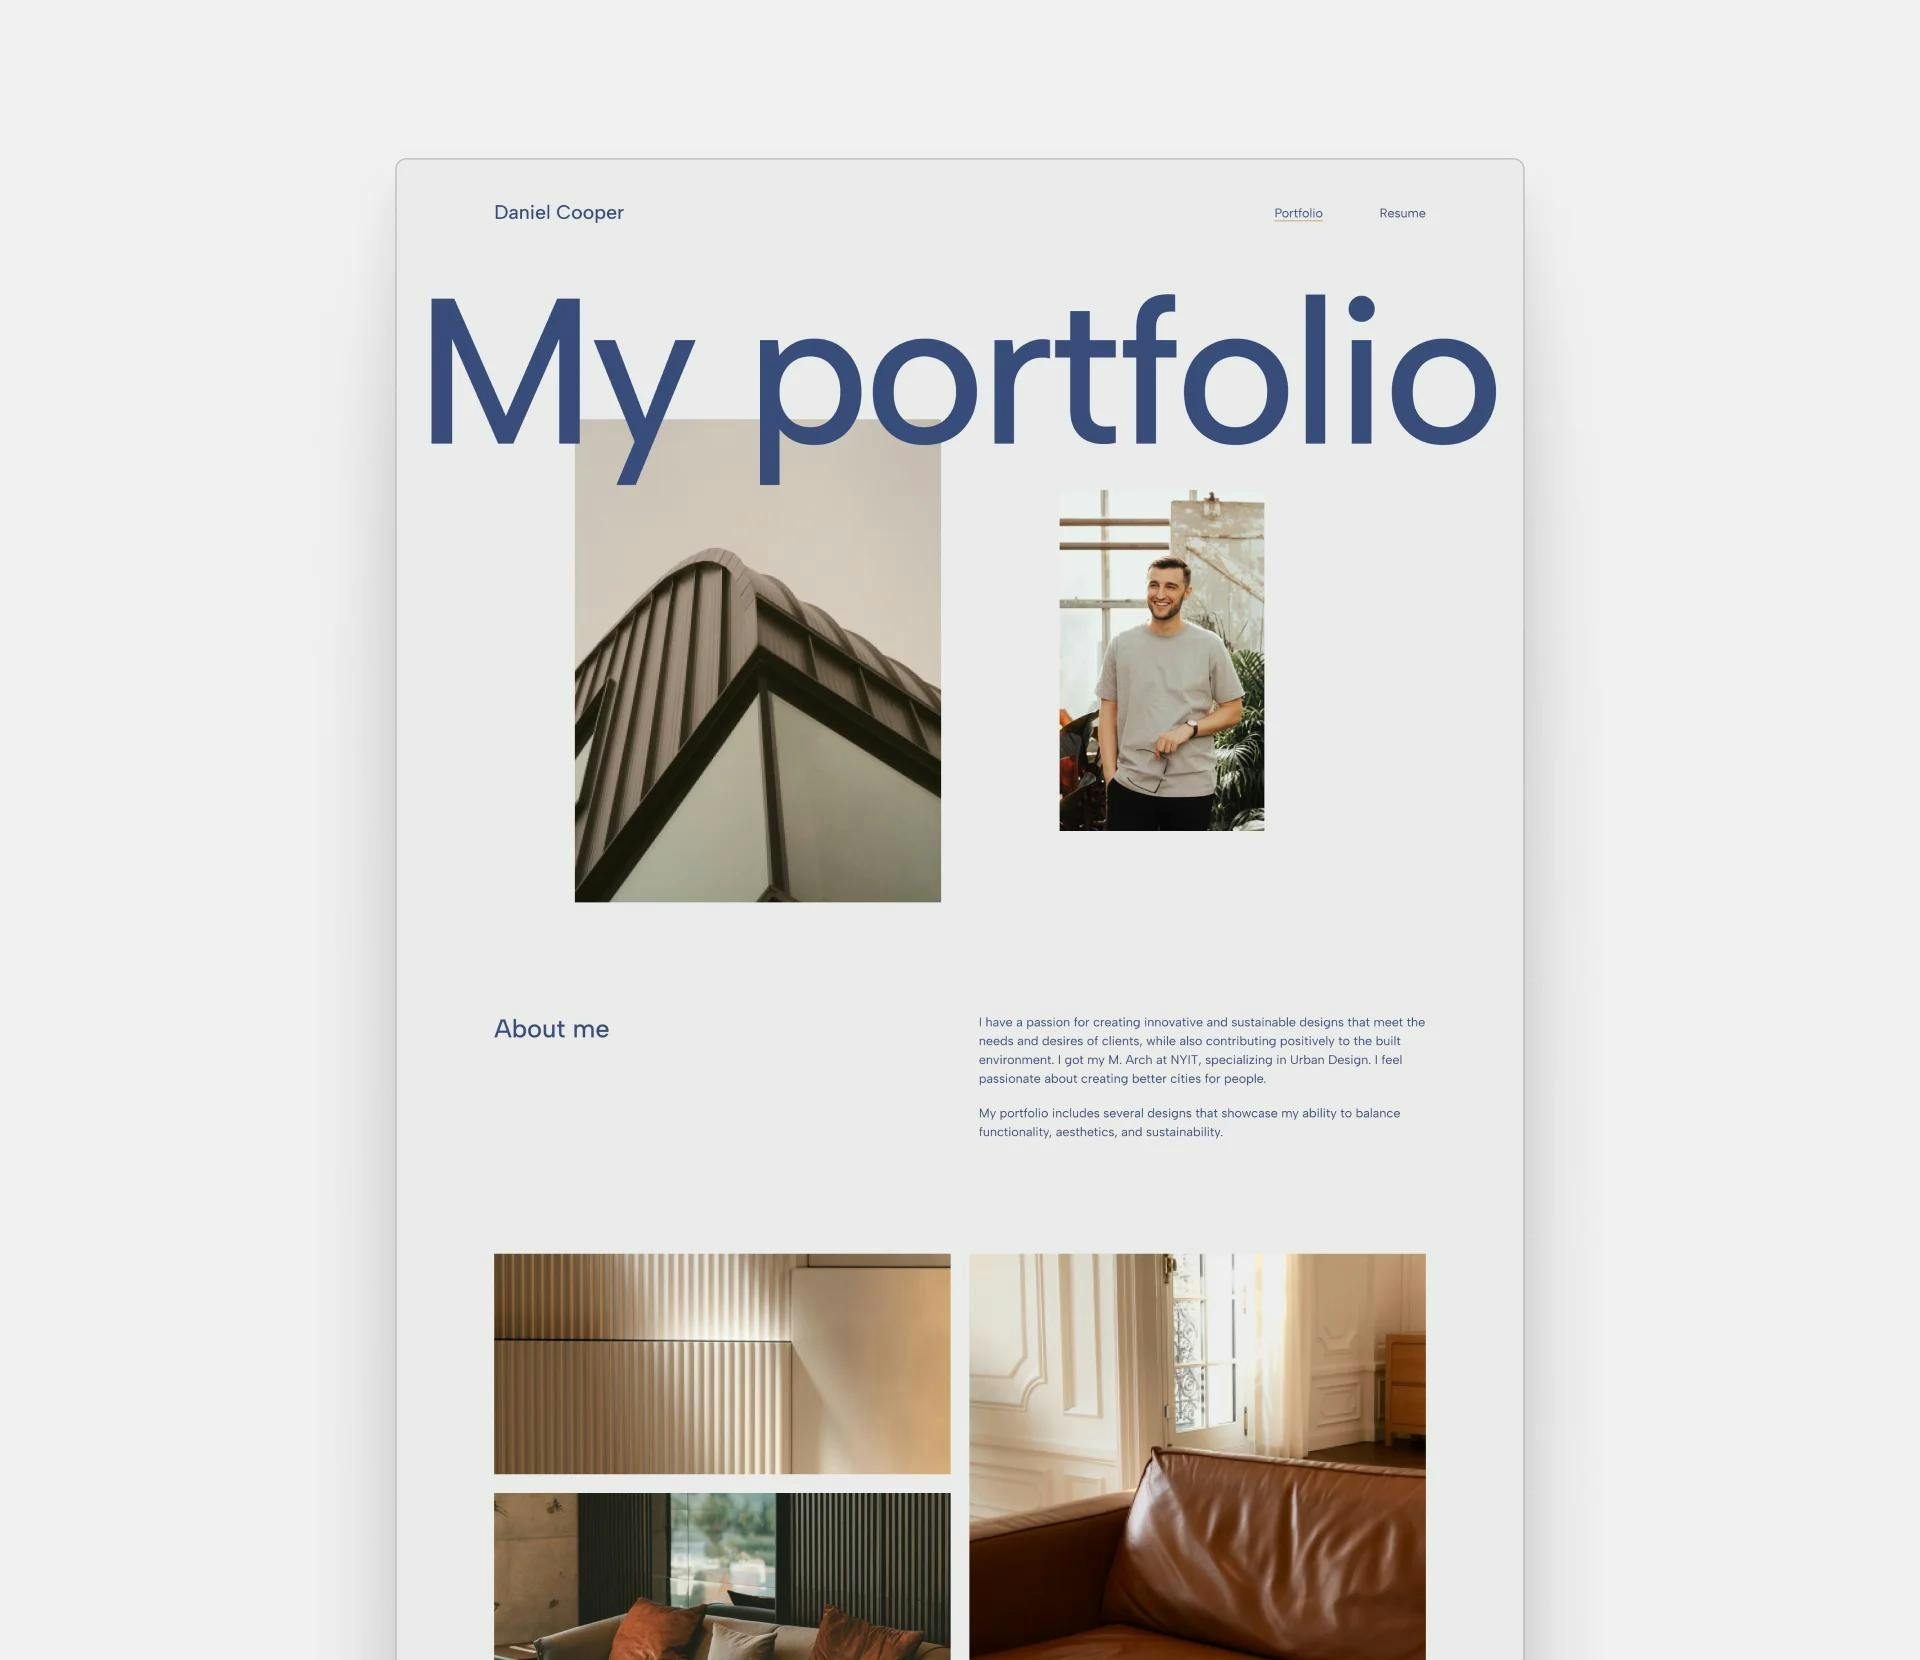 Screenshot of an interior design website template on a gray background. The template has two smaller images above the fold and a big title saying "My portfolio".